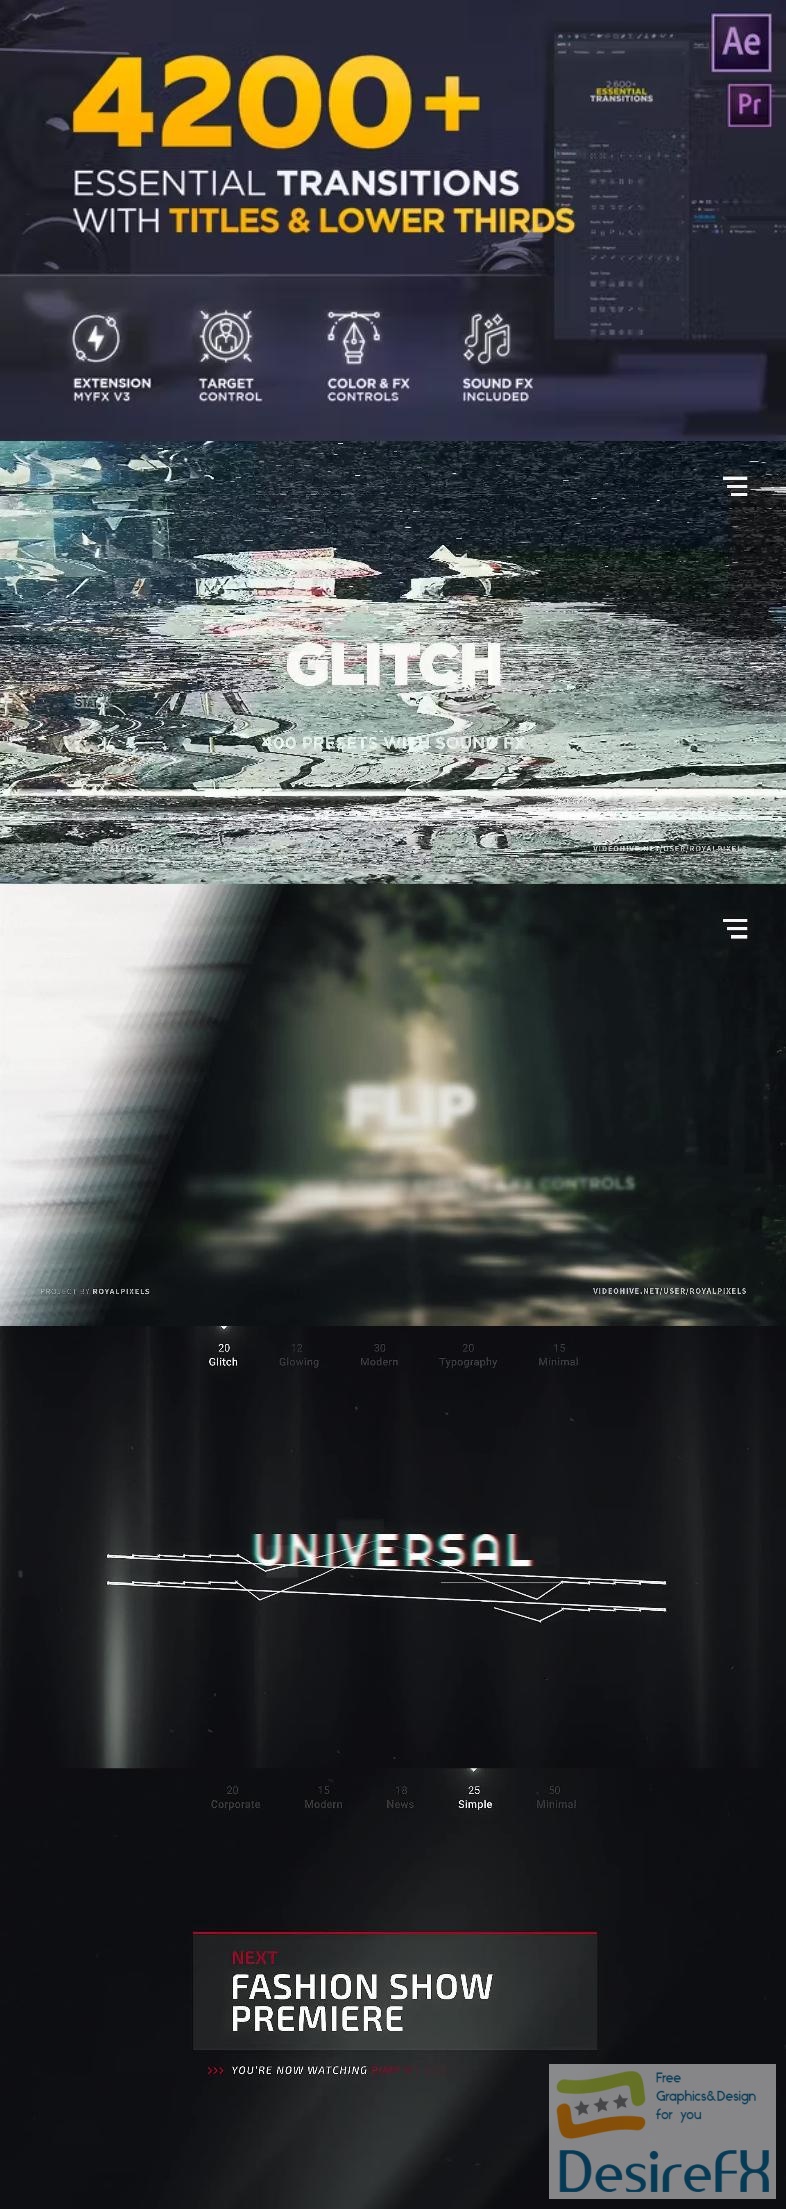 Videohive Transitions V4.1 20139771